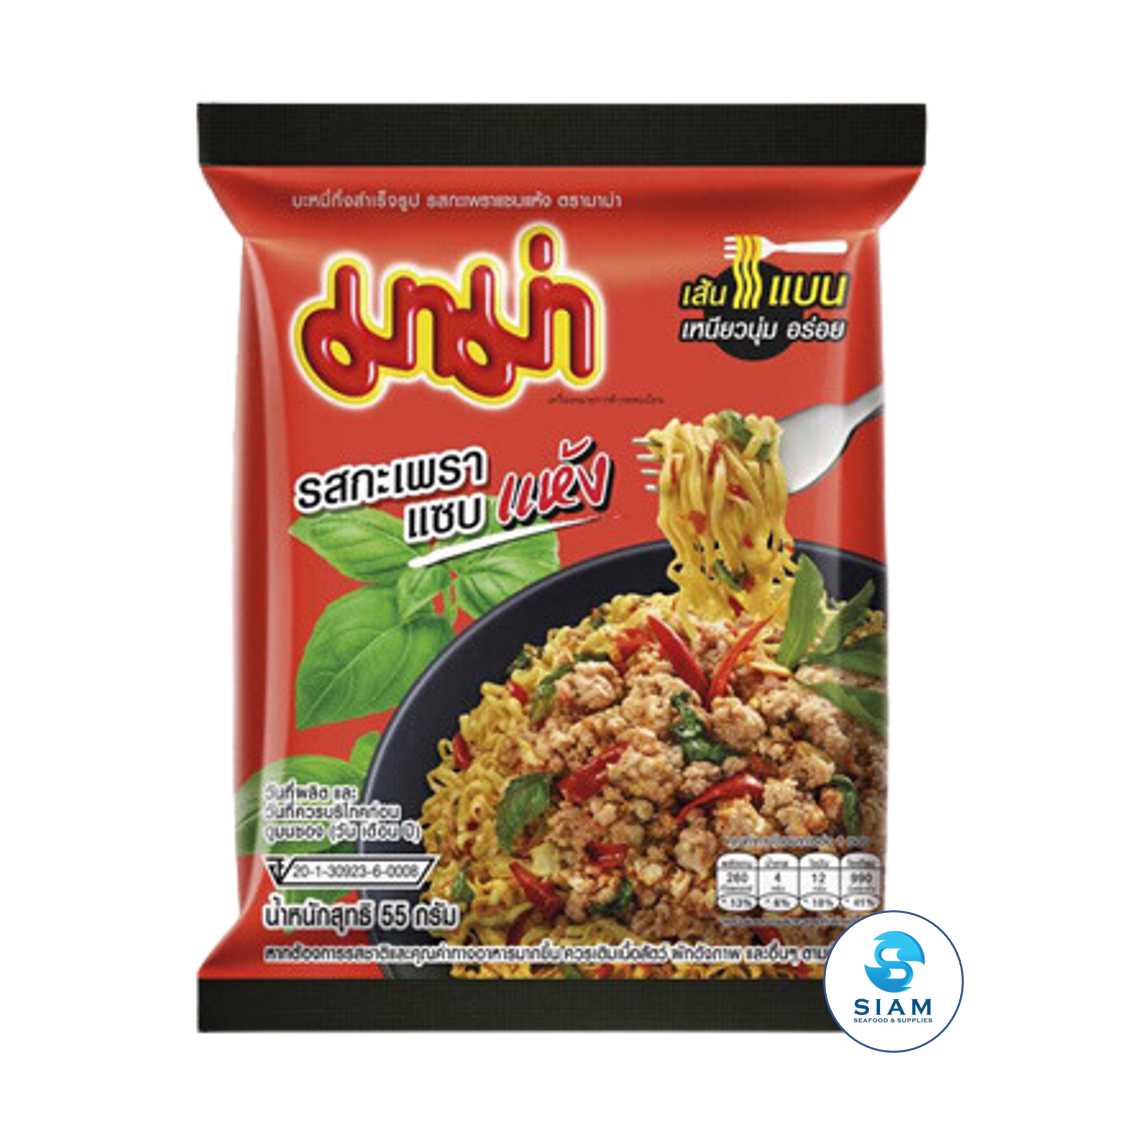 Instant Noodles Spicy Basil Stir-Fried Flavor - MaMa (6 Packs-Vol Wt 18 oz) ?????????????? ??????? ??shippable MaMa